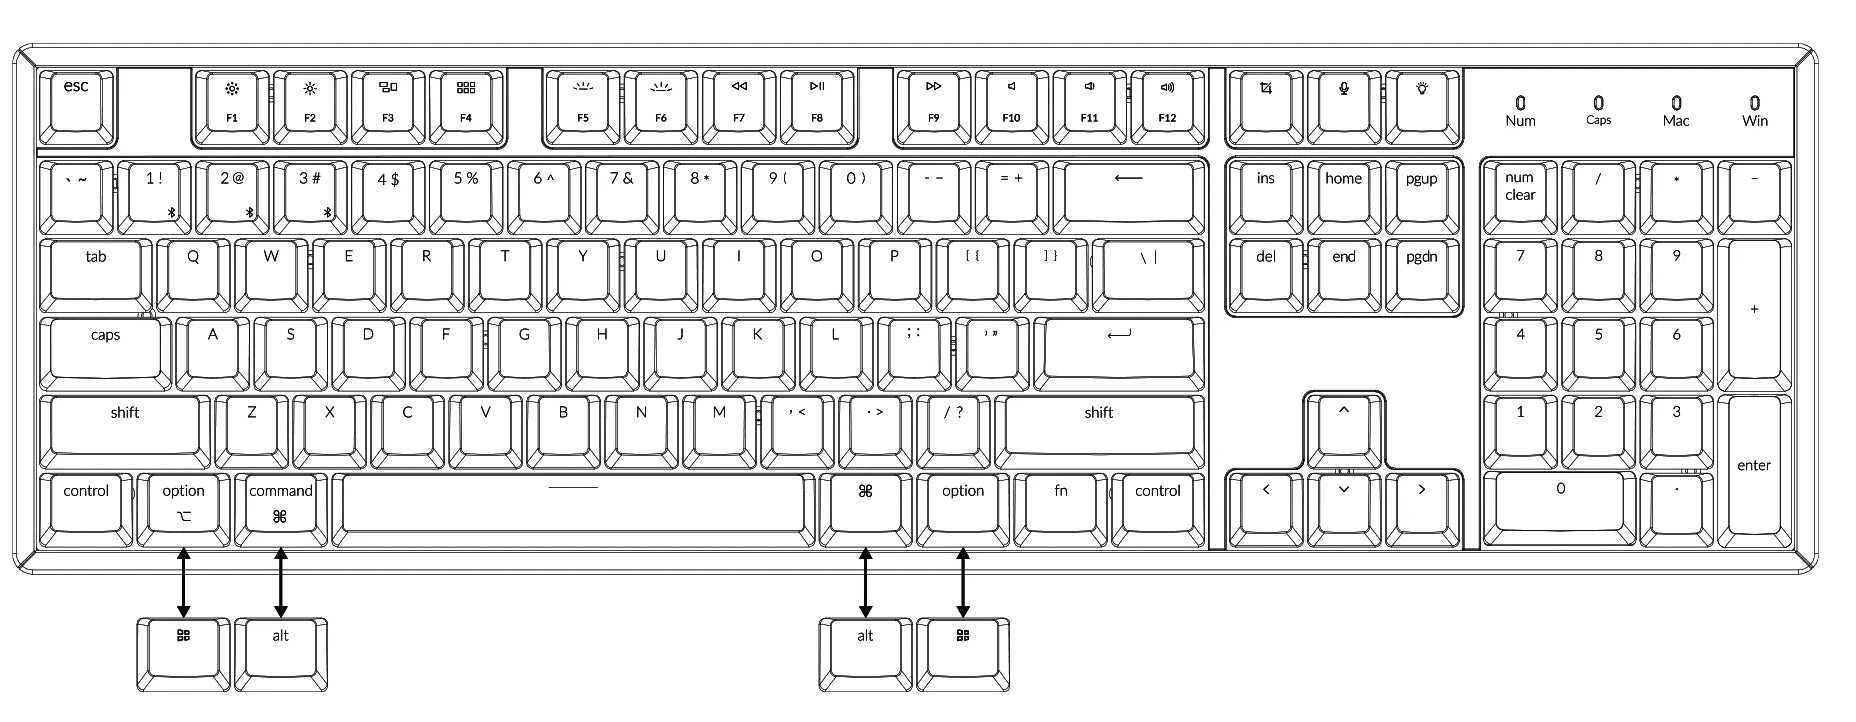 Keychron K10 full size wireless mechanical keyboard for Mac Windows Android - Gateron mechanical switch and LK optical switch 